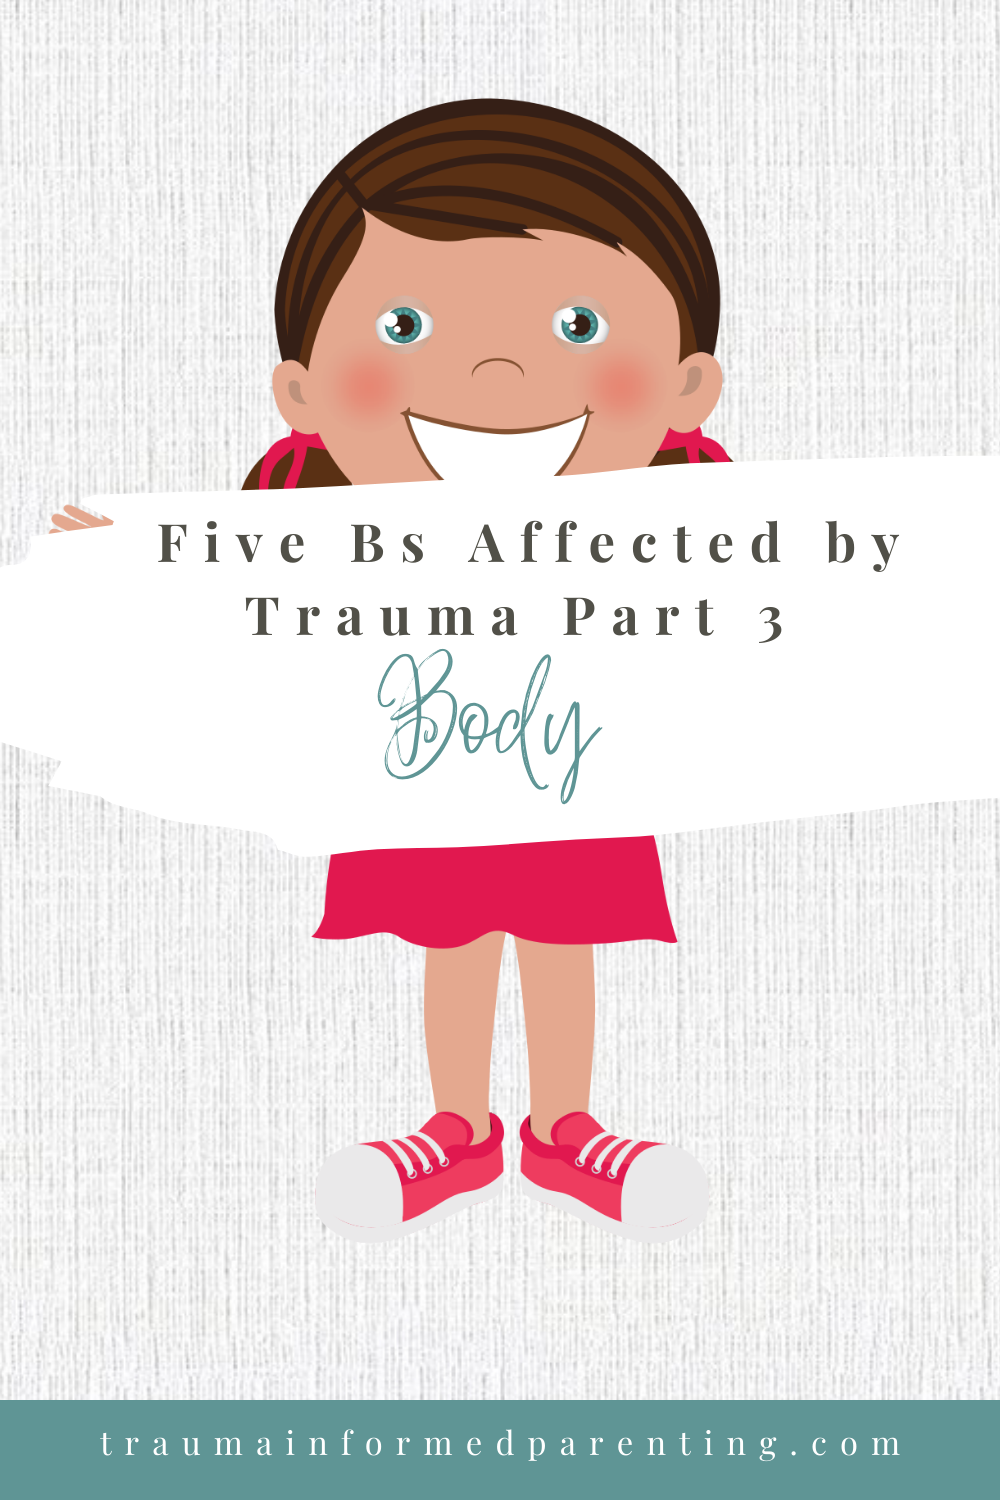 Five Bs Affected by Trauma Part 3 – The Body